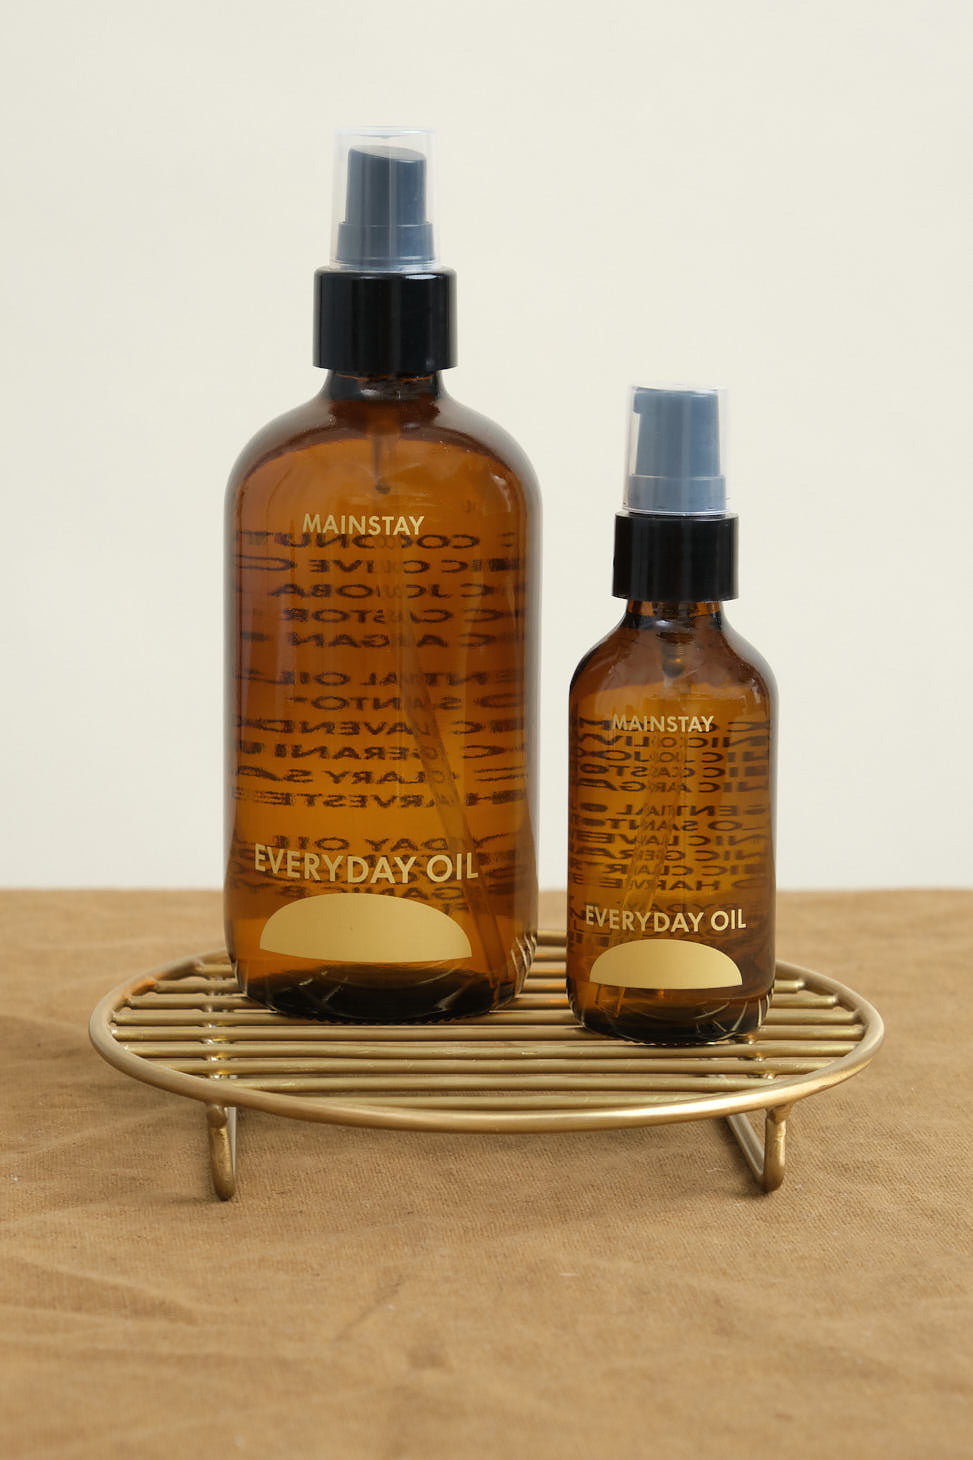 8 oz Everyday Oil with 2 oz bottle